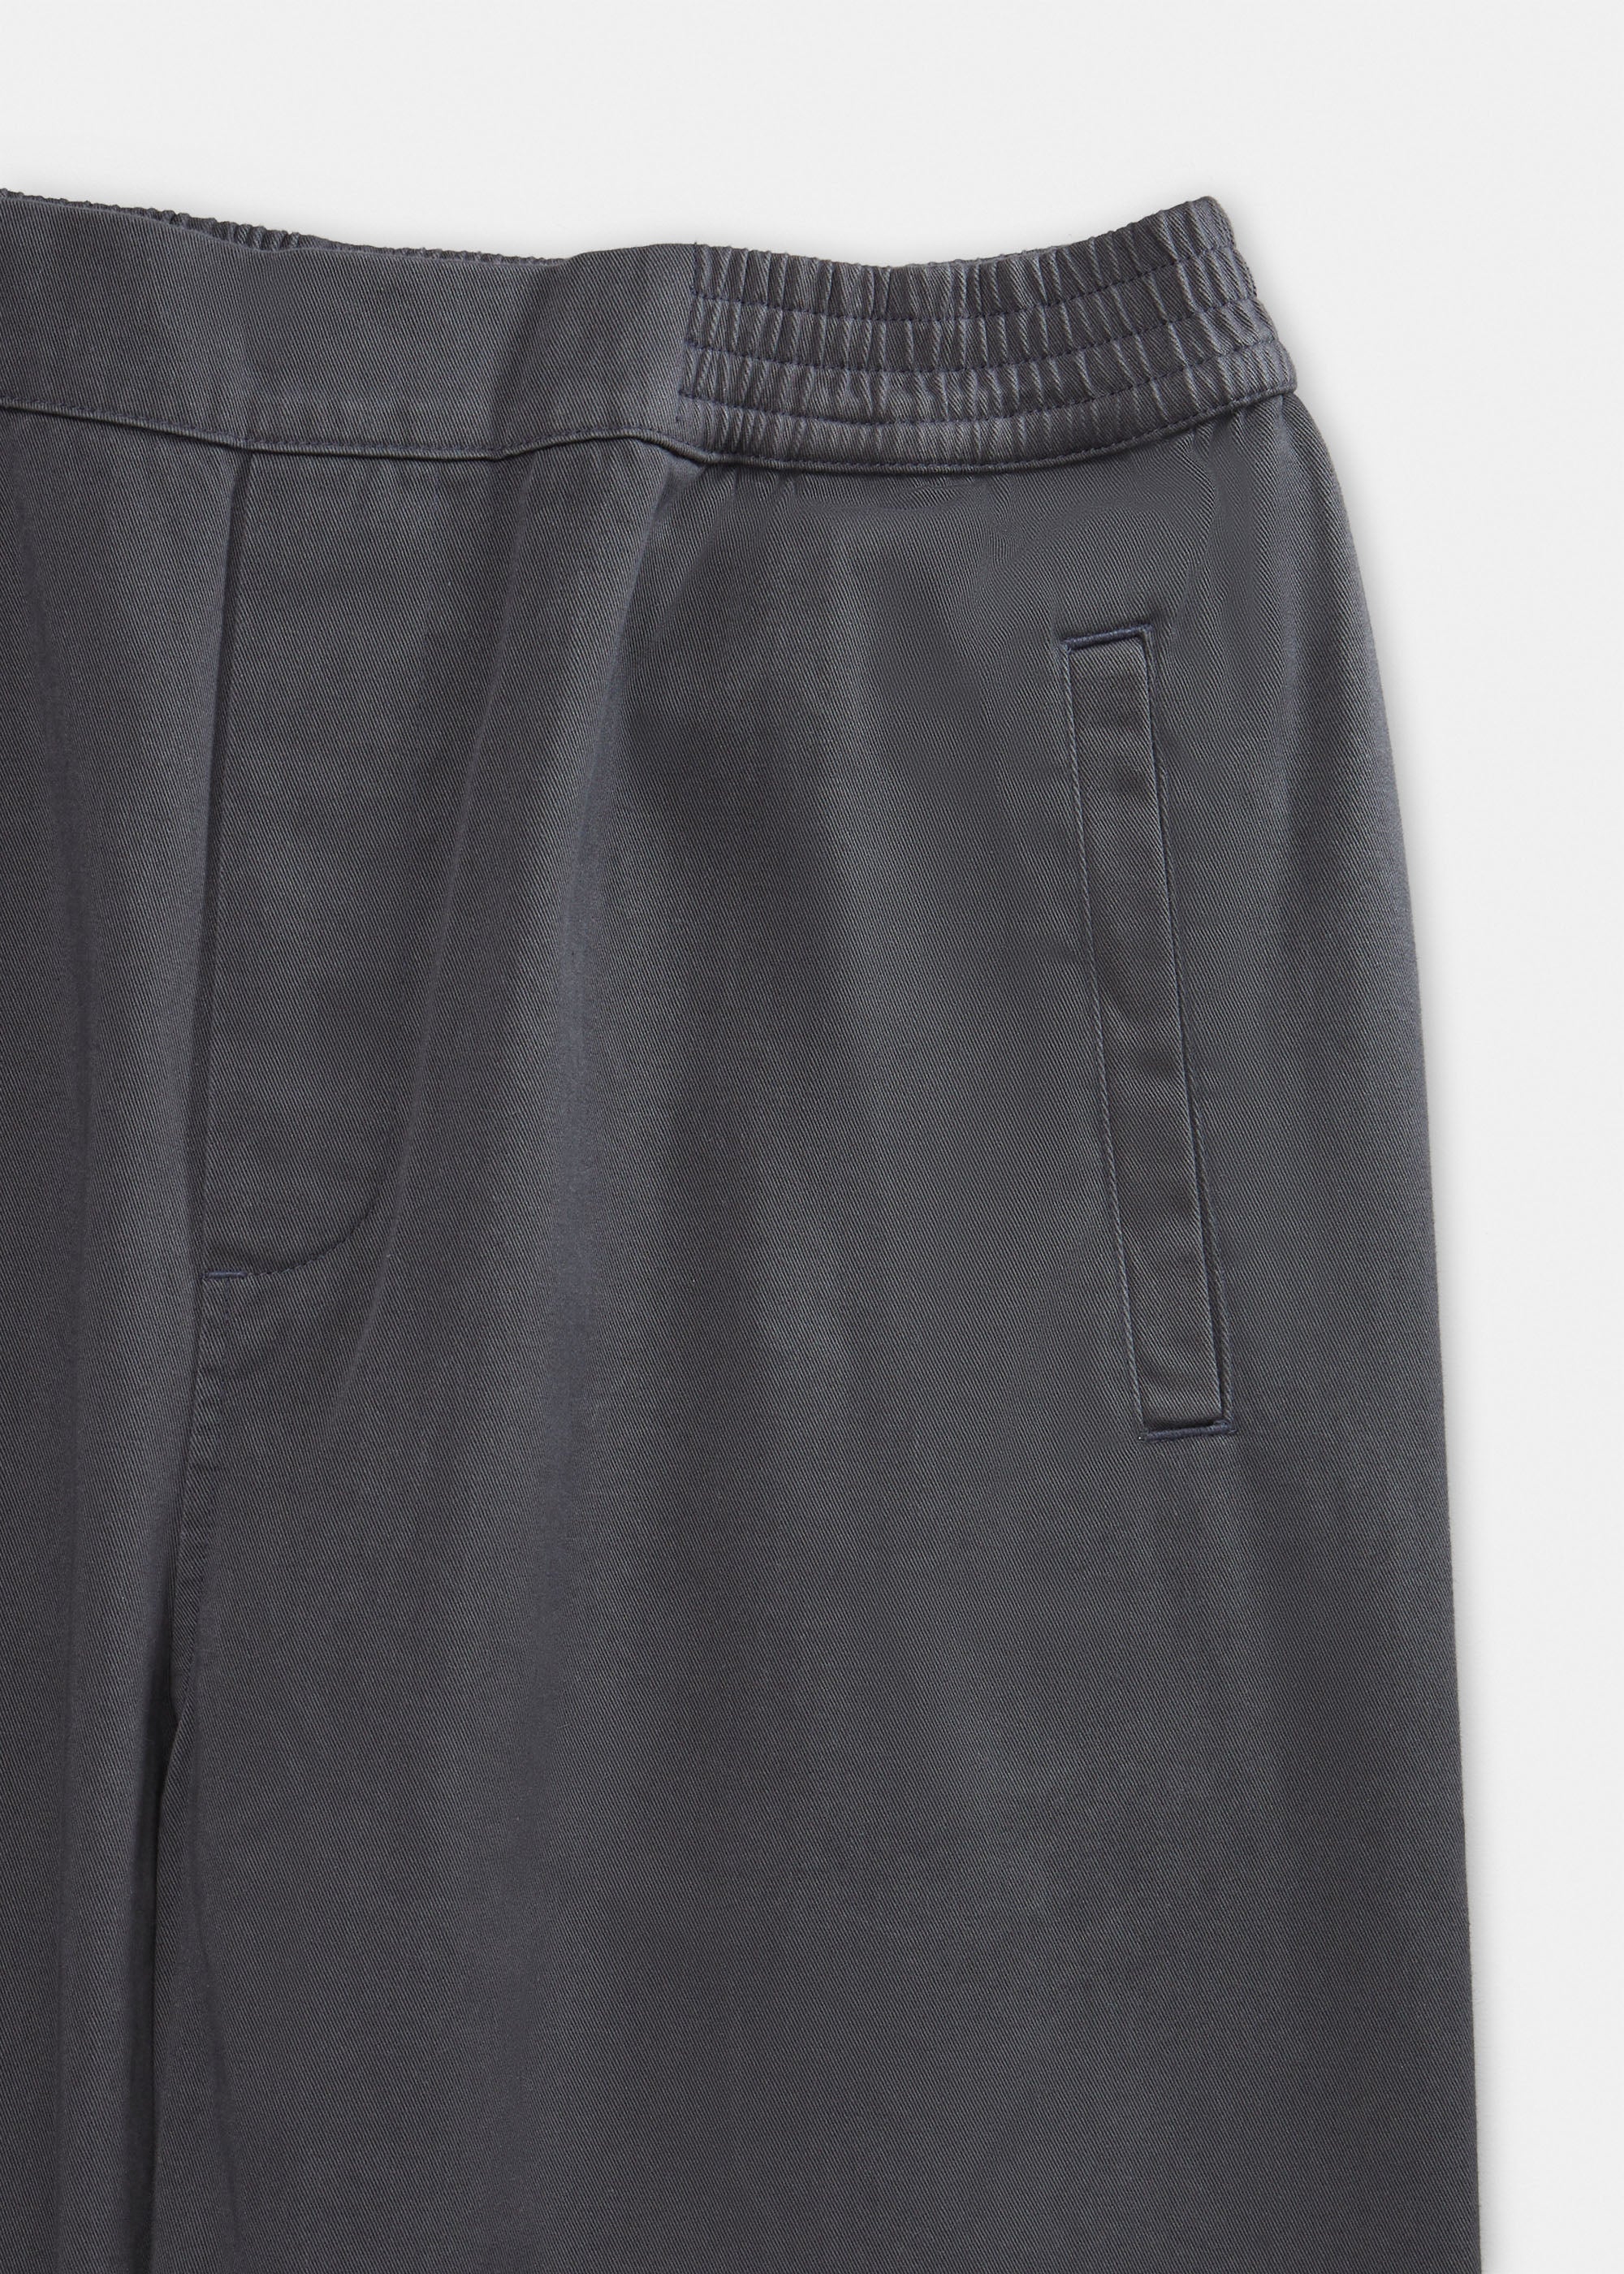 Coco pant twill | Steel